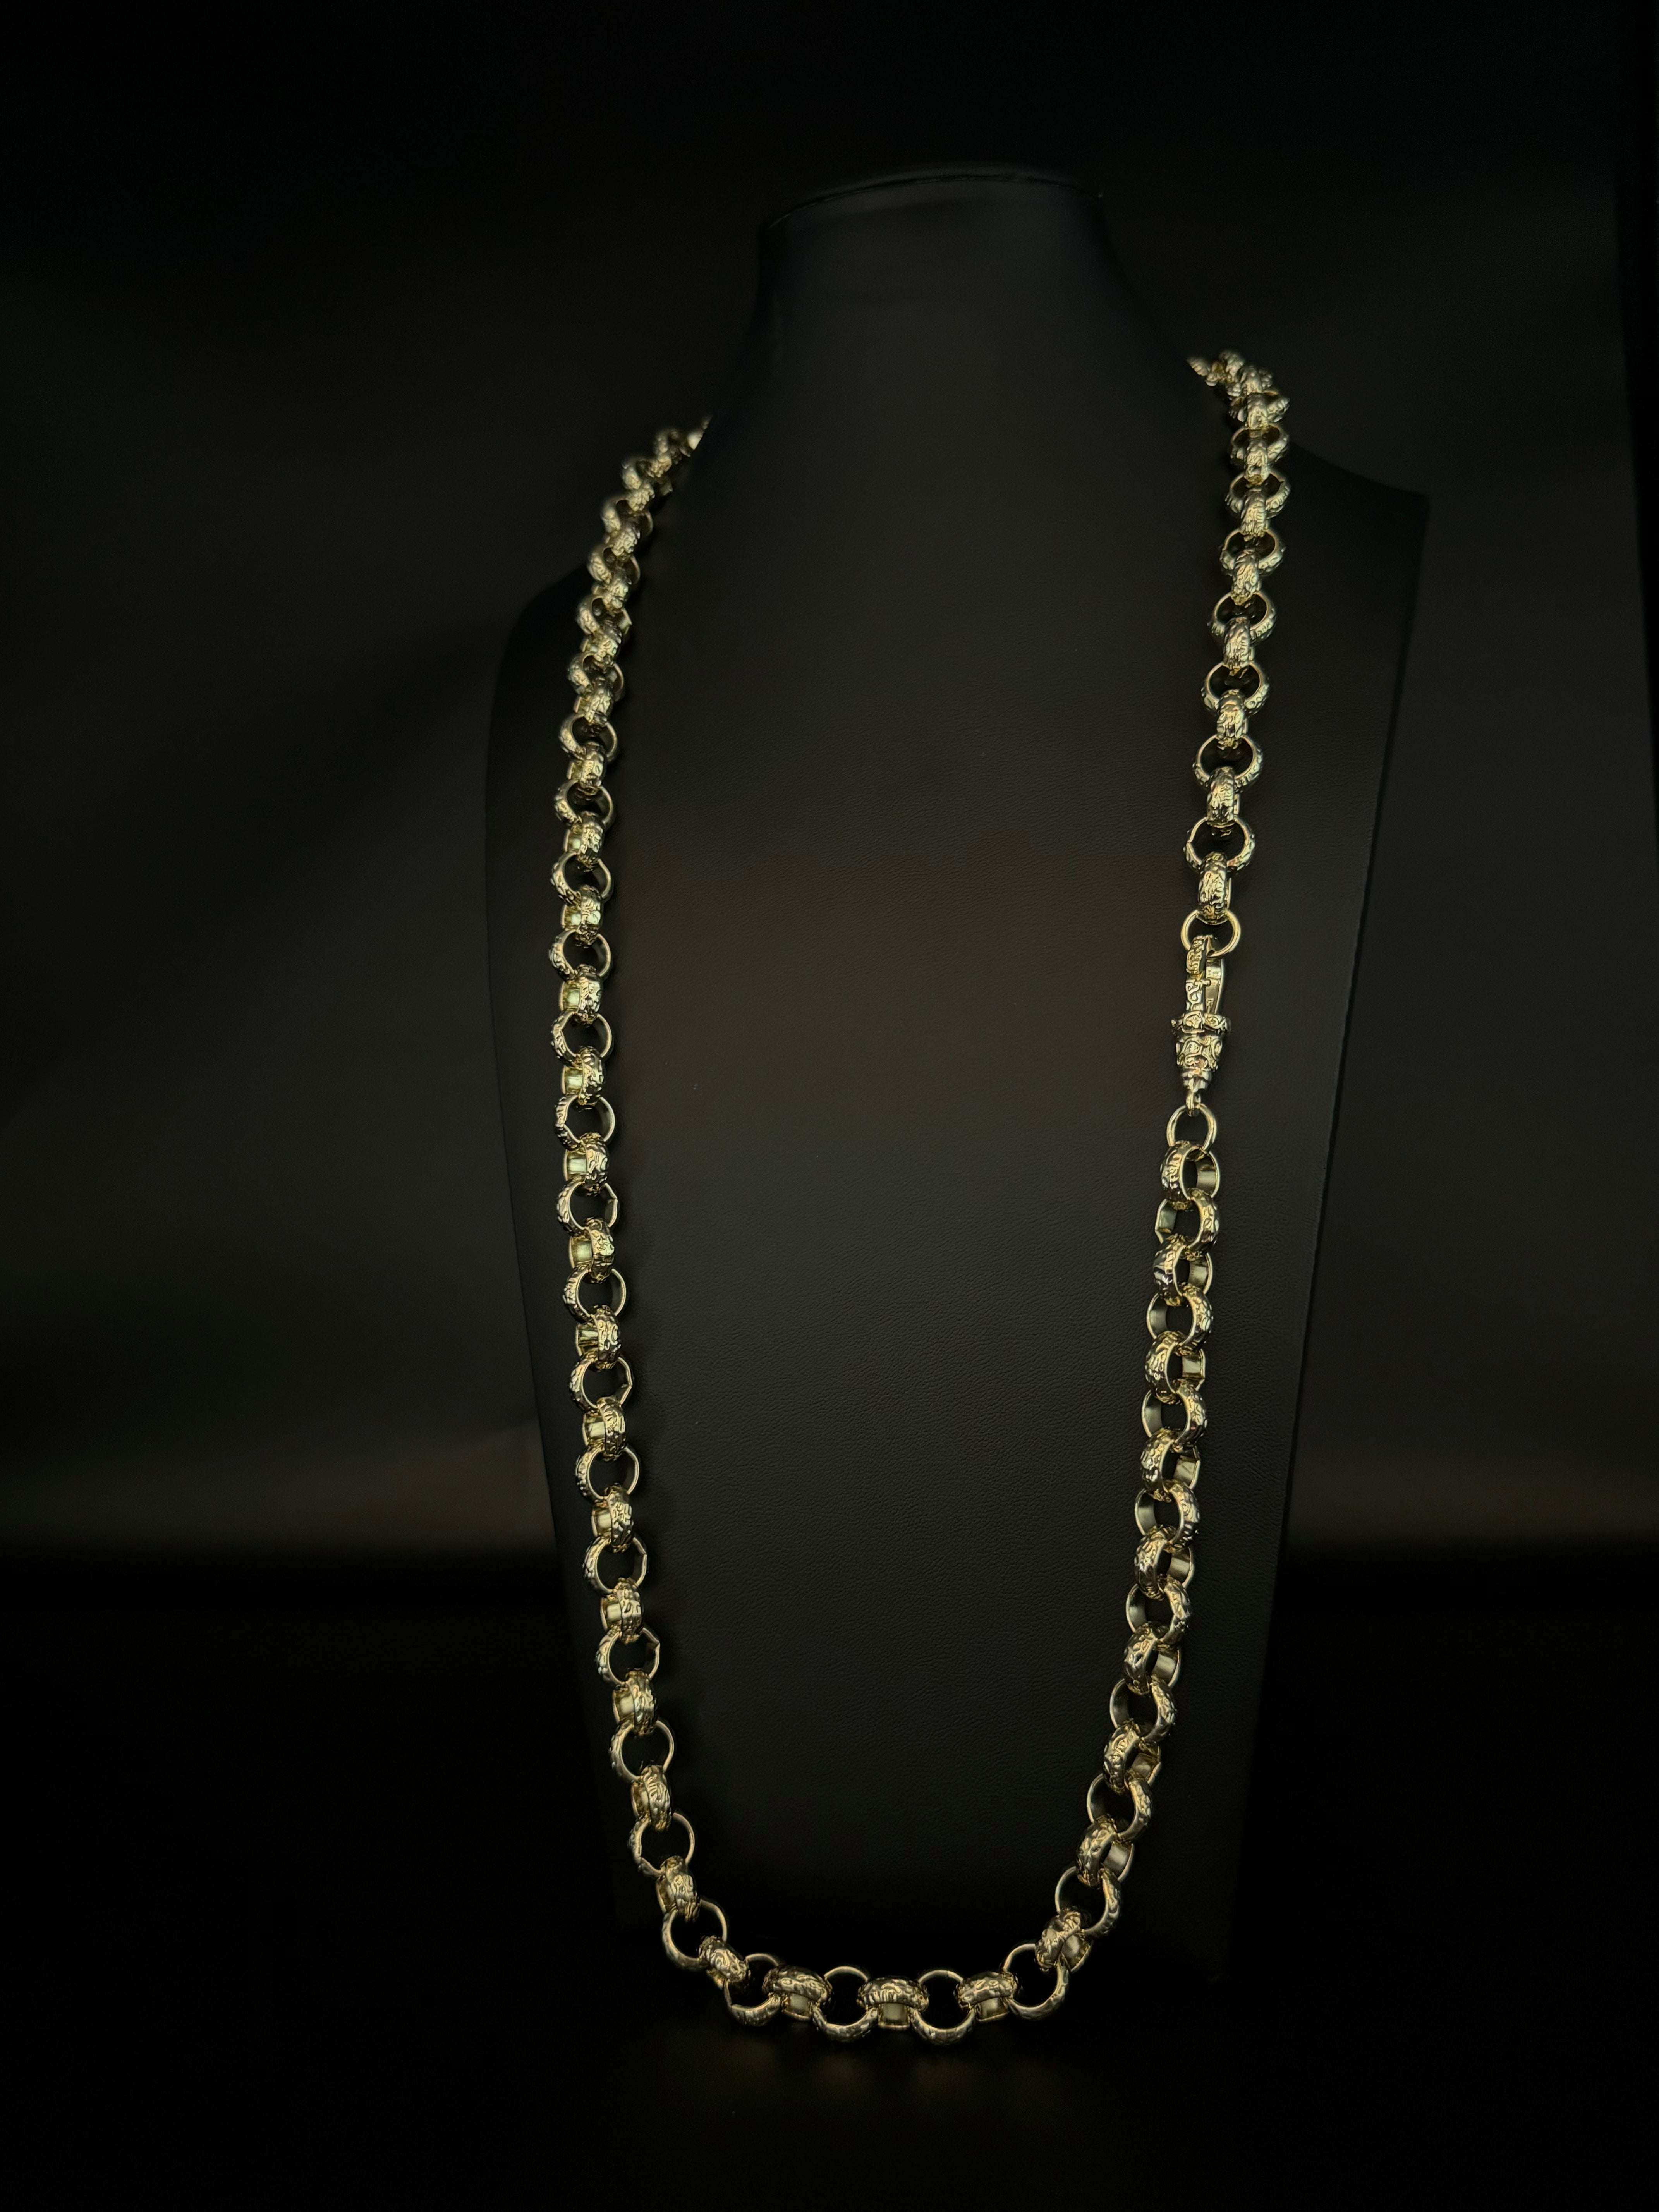 9ct Gold Filled Belcher Patterned  Chain 12mm